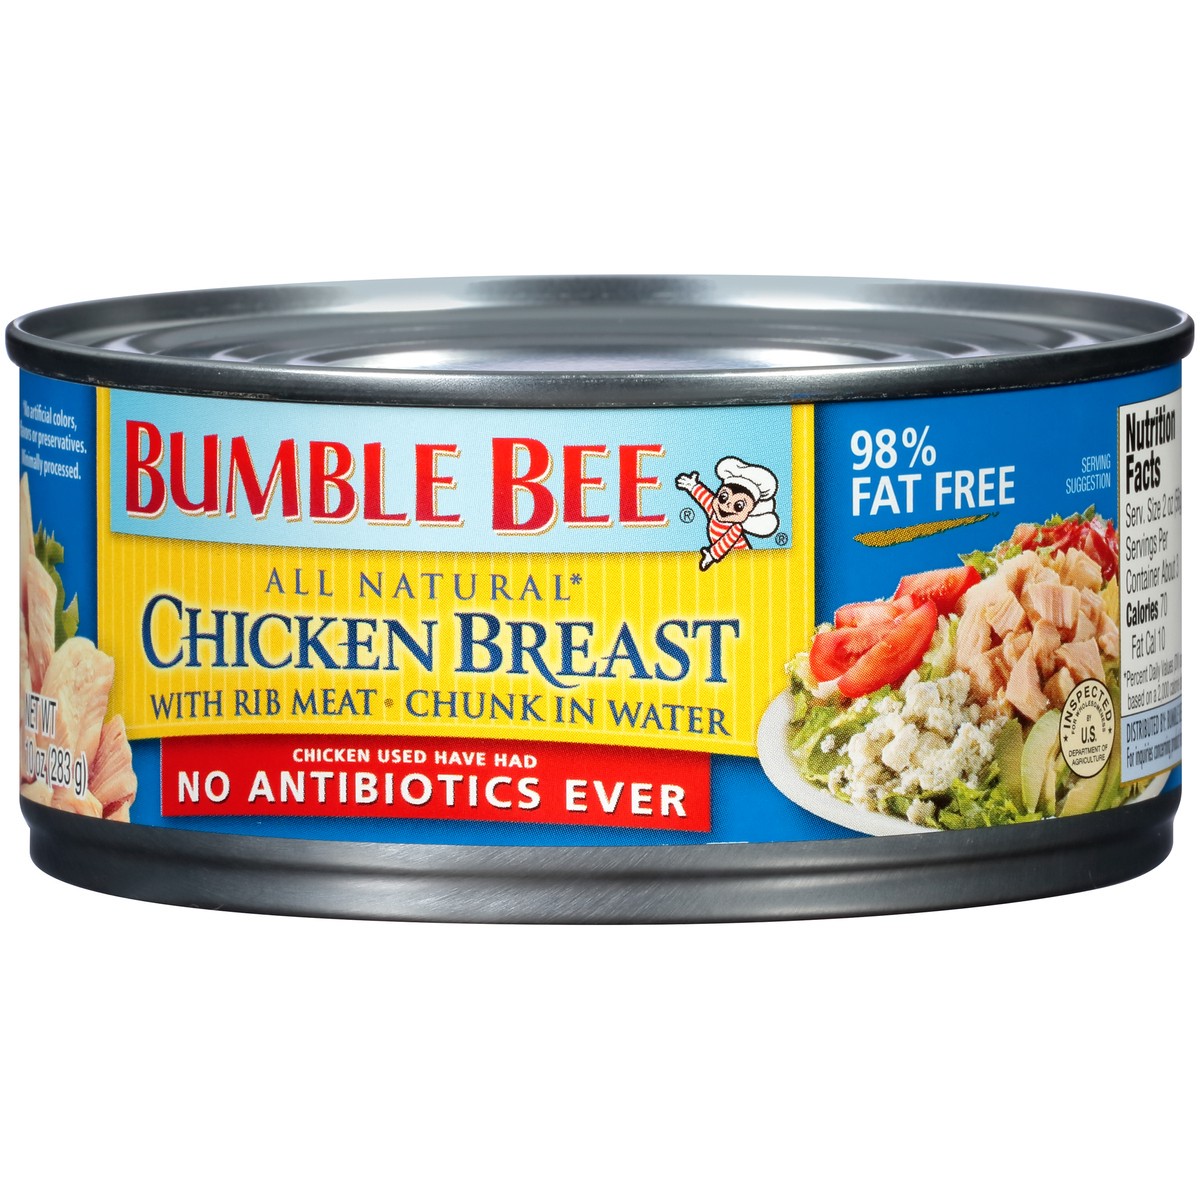 slide 5 of 11, Bumble Bee All Natural Chicken Breast with Rib Meat Chunk in Water Chicken Breas, 10 oz